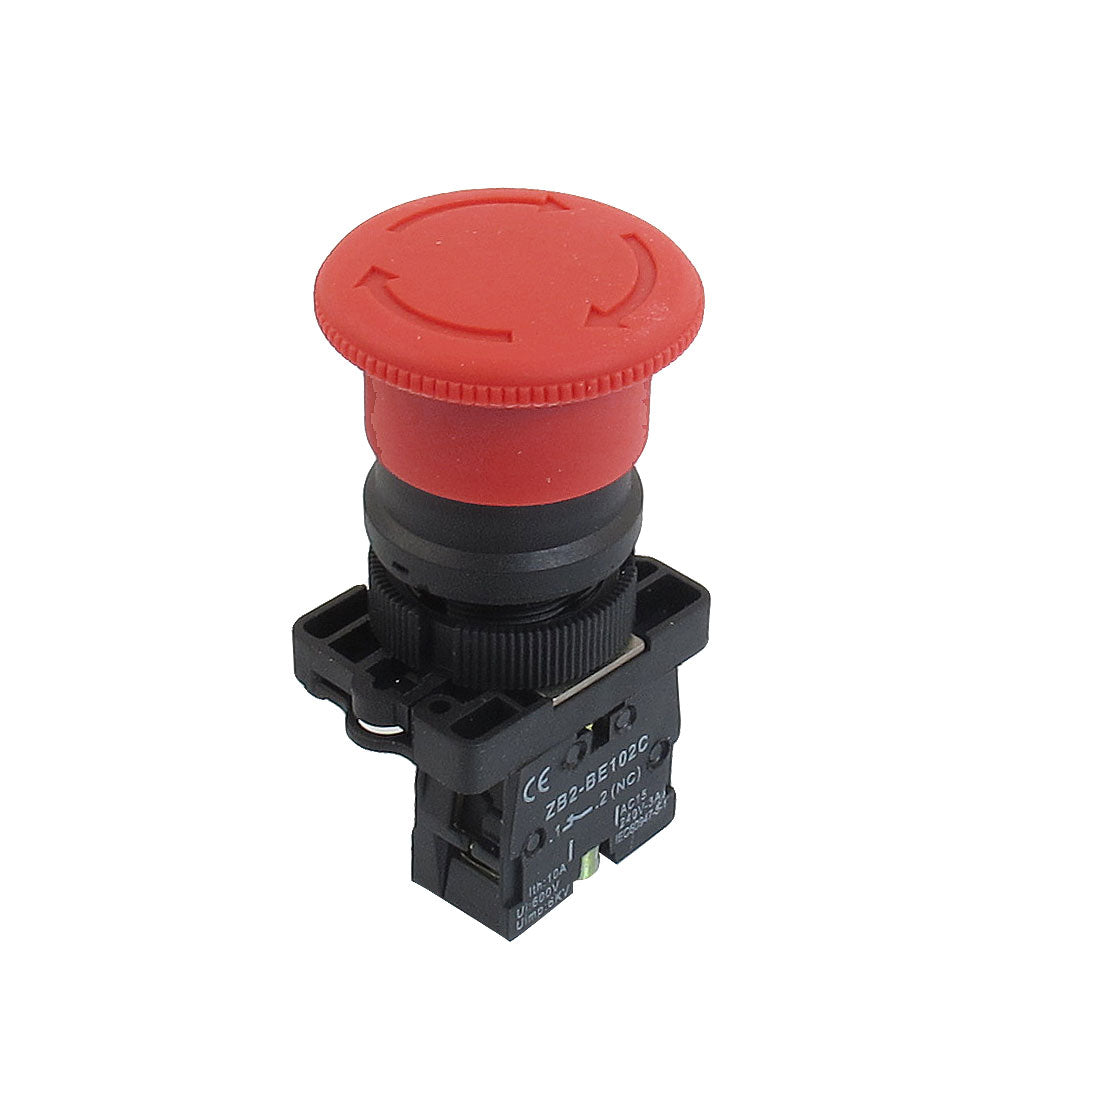 uxcell Uxcell 22mm NC N/C Red Mushroom Emergency Stop Push Button Switch 600V 10A Plastic Mounting